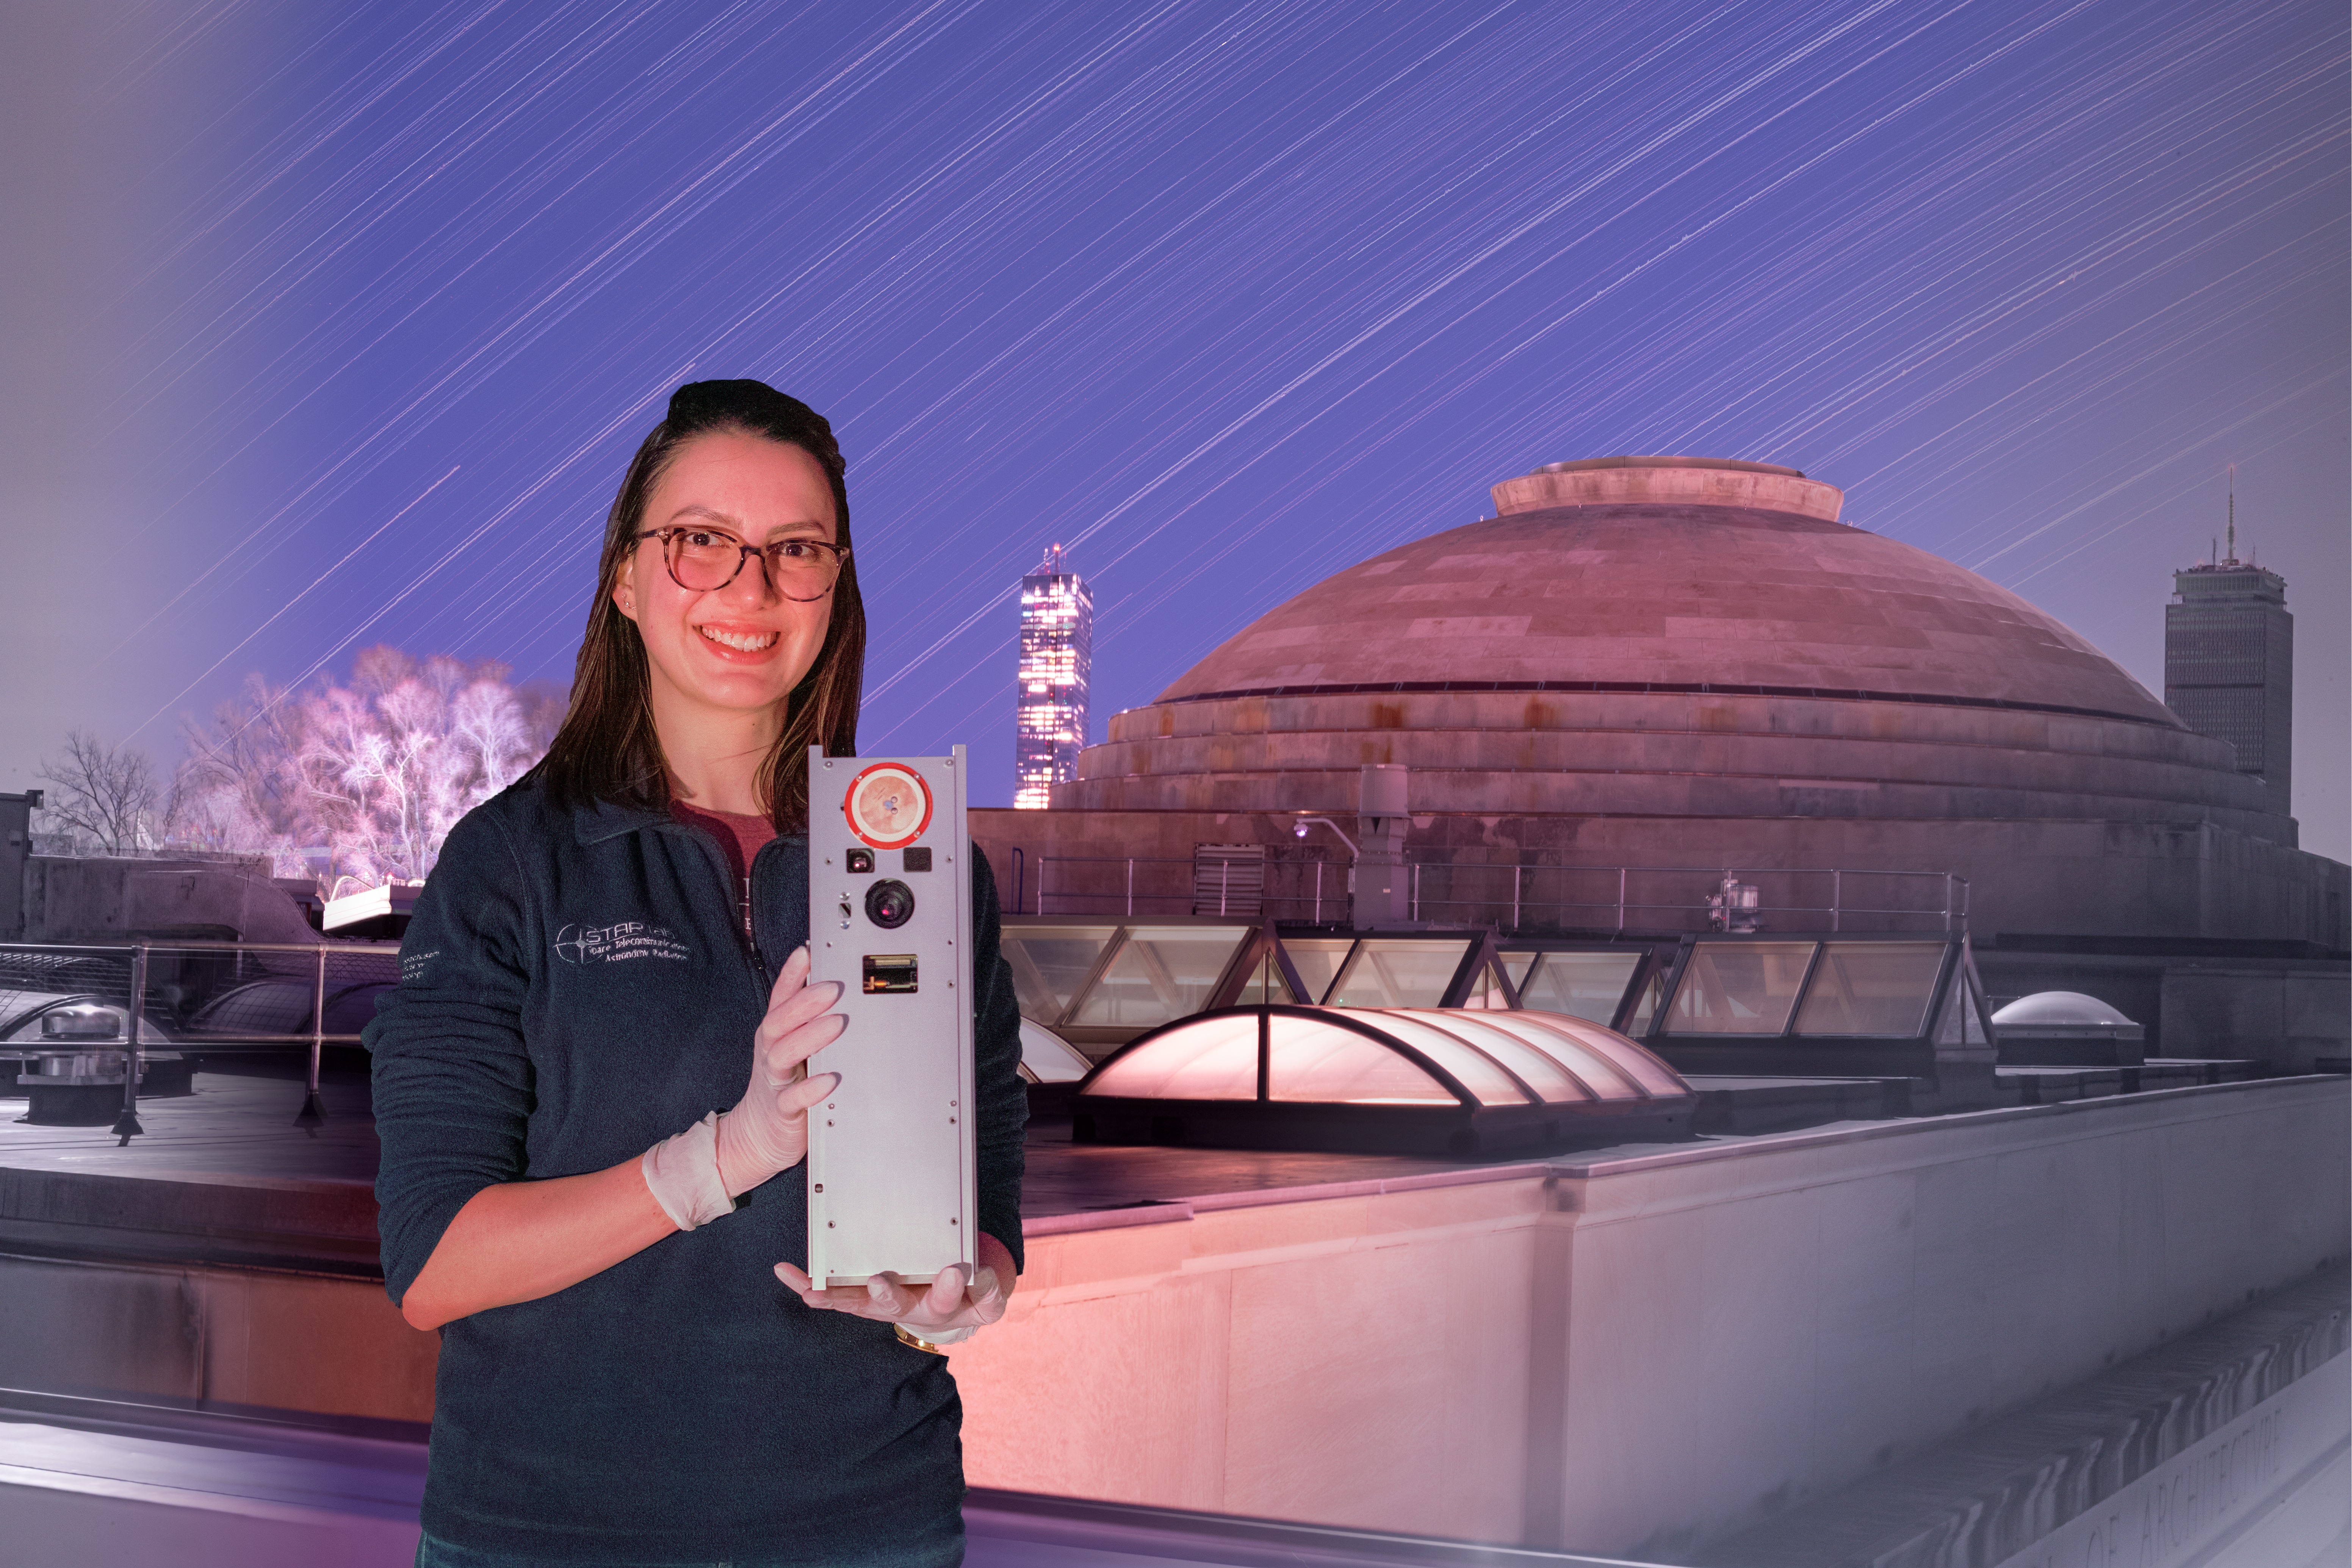 Paula do Vale Pereira, wearing latex gloves, holds BeaverCube, which is the size and shape of a desktop PC. Star trails are in the background, behind the MIT dome.